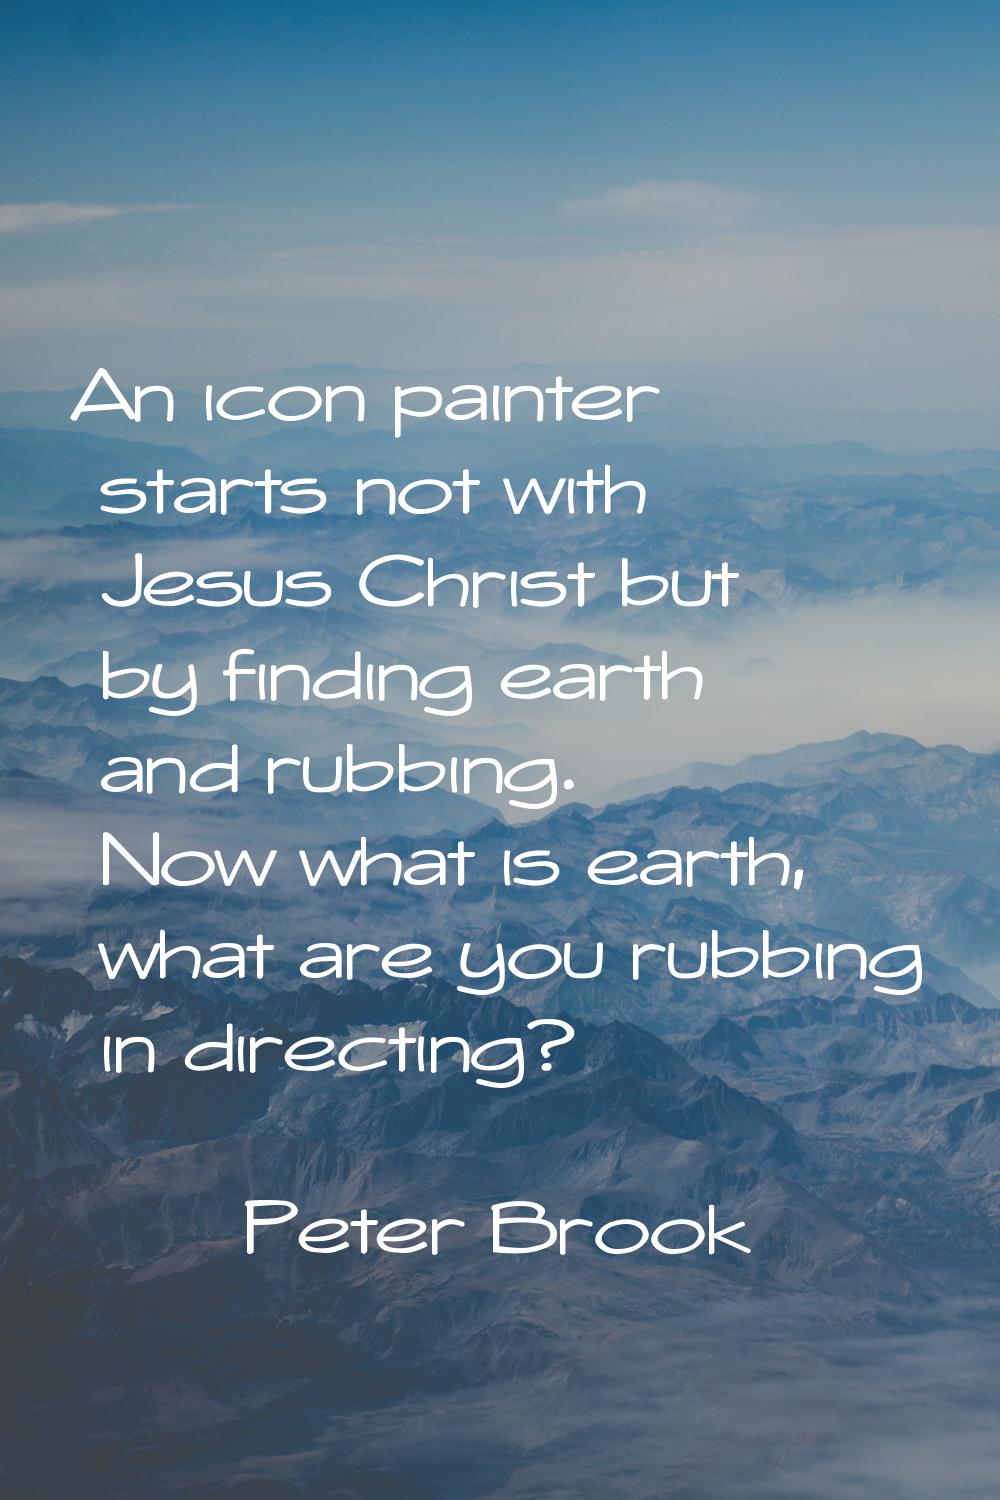 An icon painter starts not with Jesus Christ but by finding earth and rubbing. Now what is earth, w